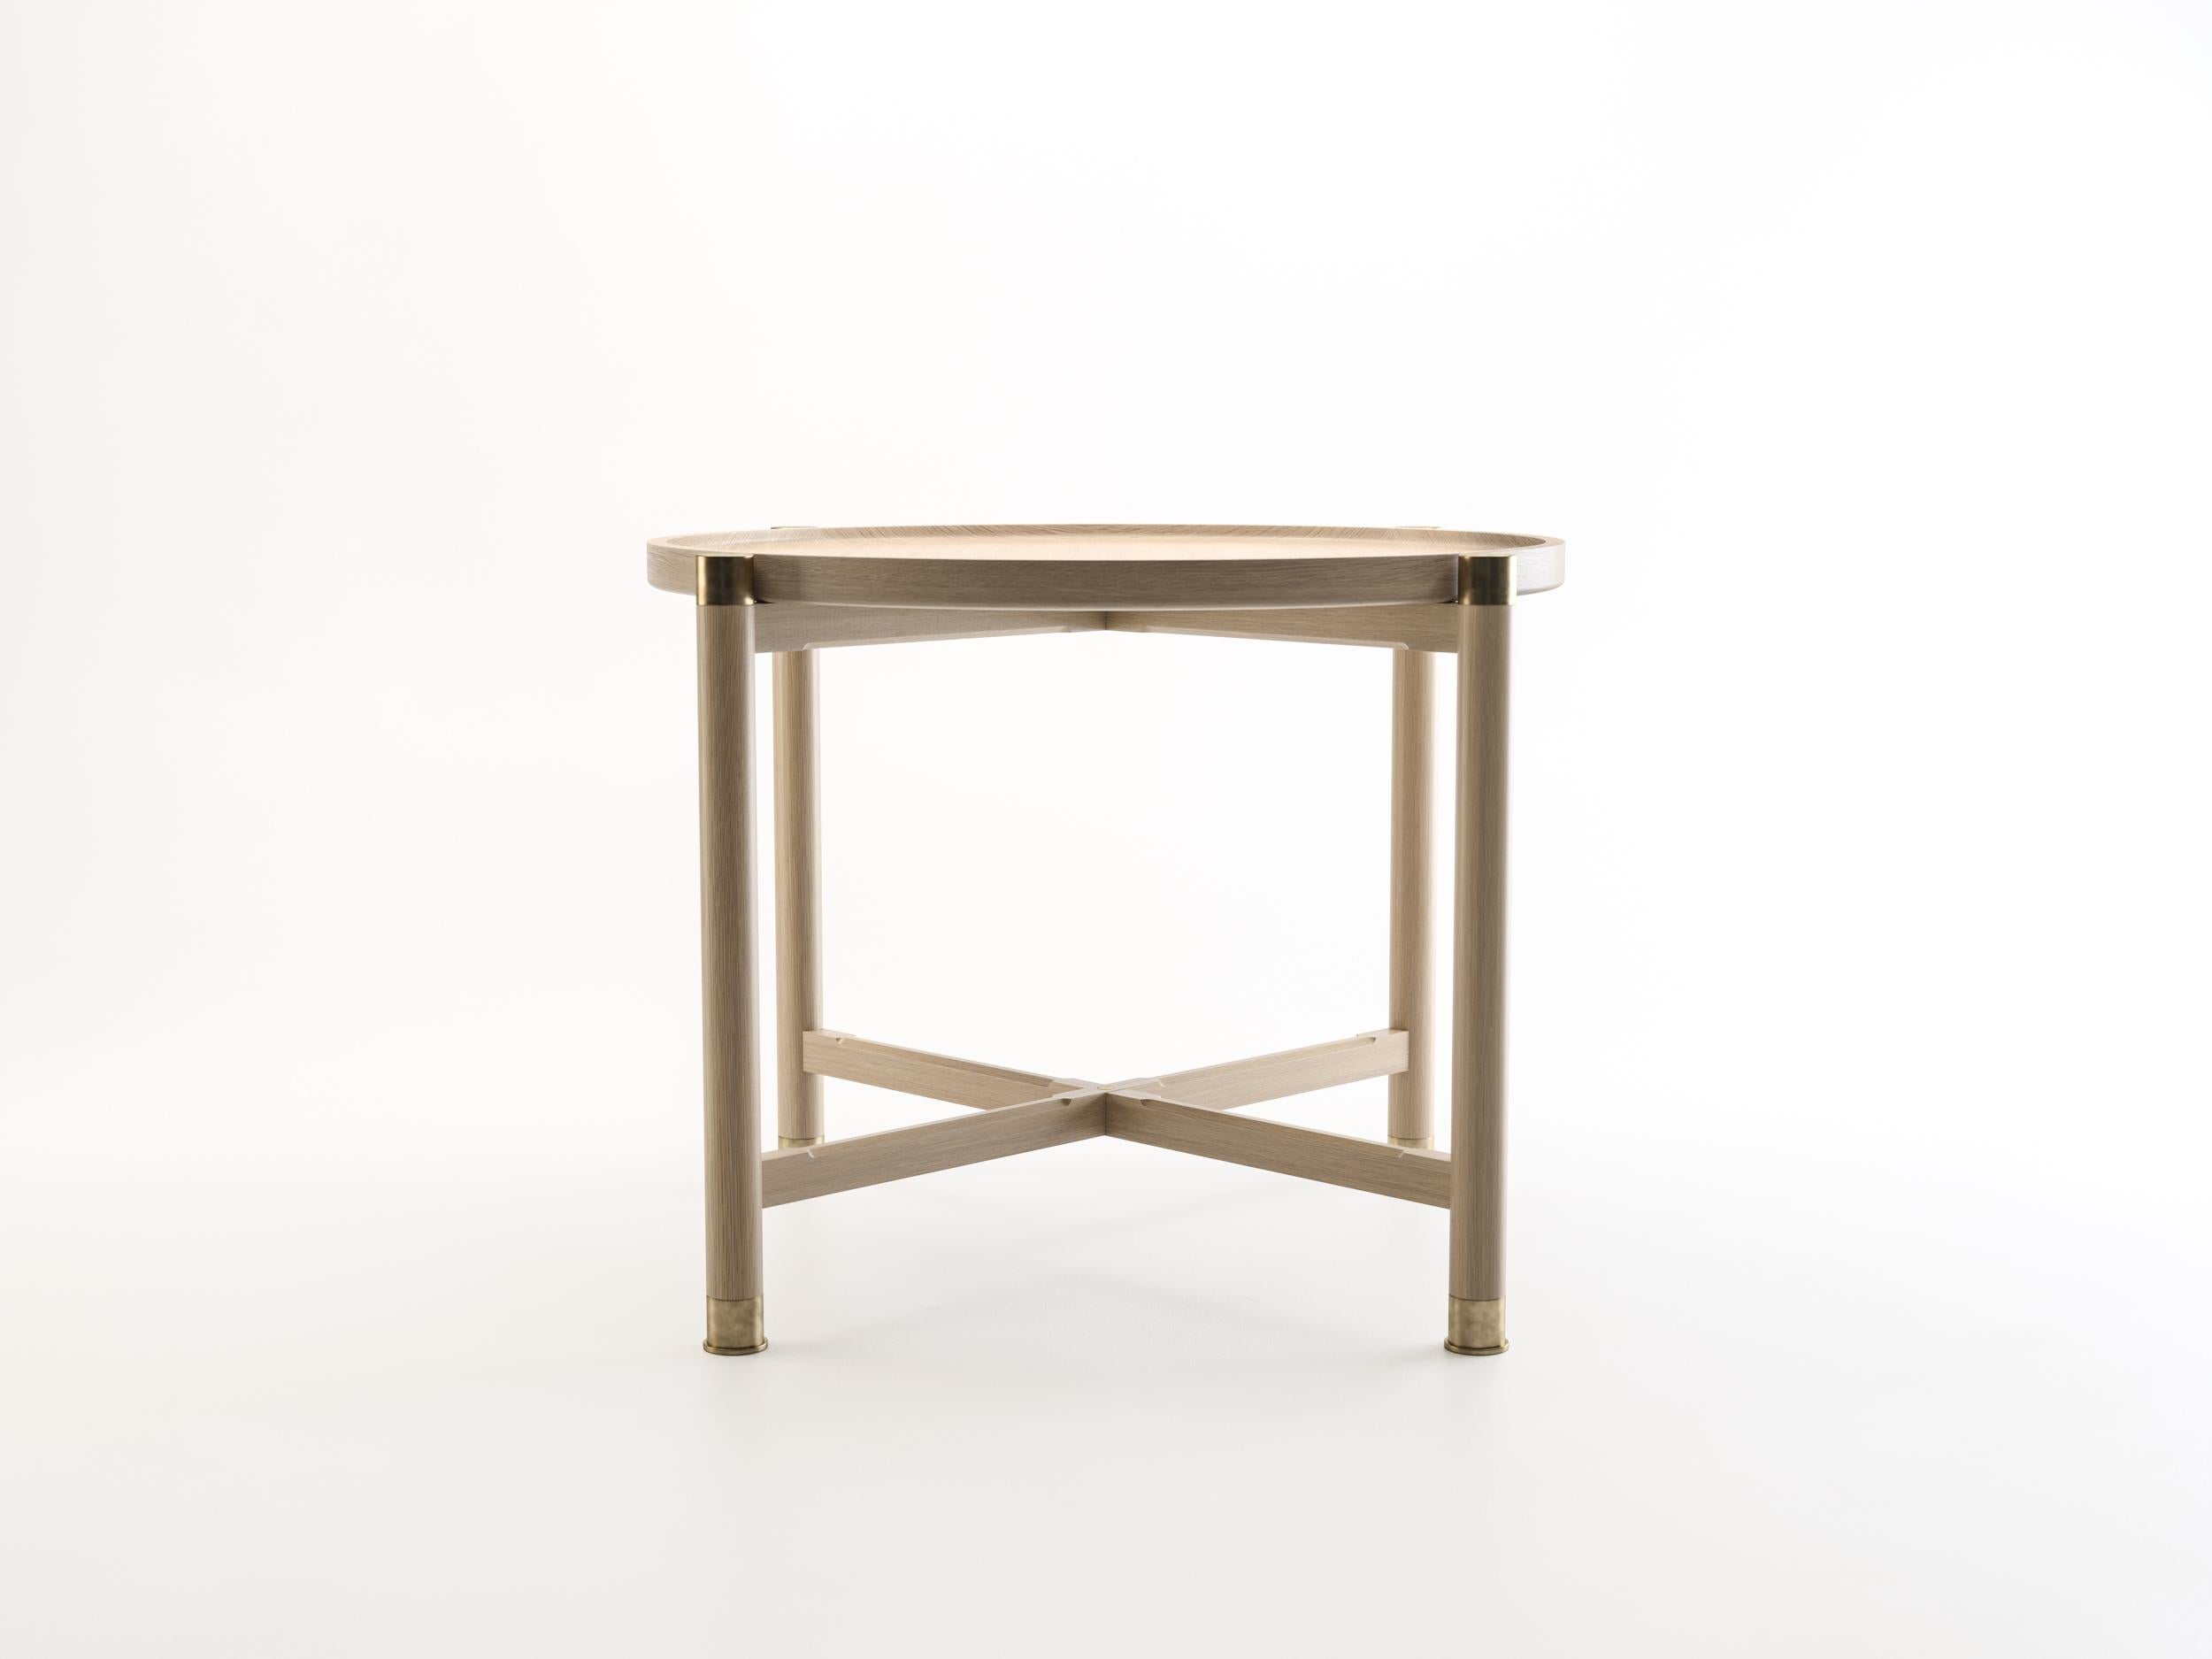 The Otto side table is a generously proportioned table with a simple, well-articulated form.
It features a round coupe top, substantial antique brass fittings, and sleek chamfered stretchers. The epitome of understated elegance, tasteful, but not